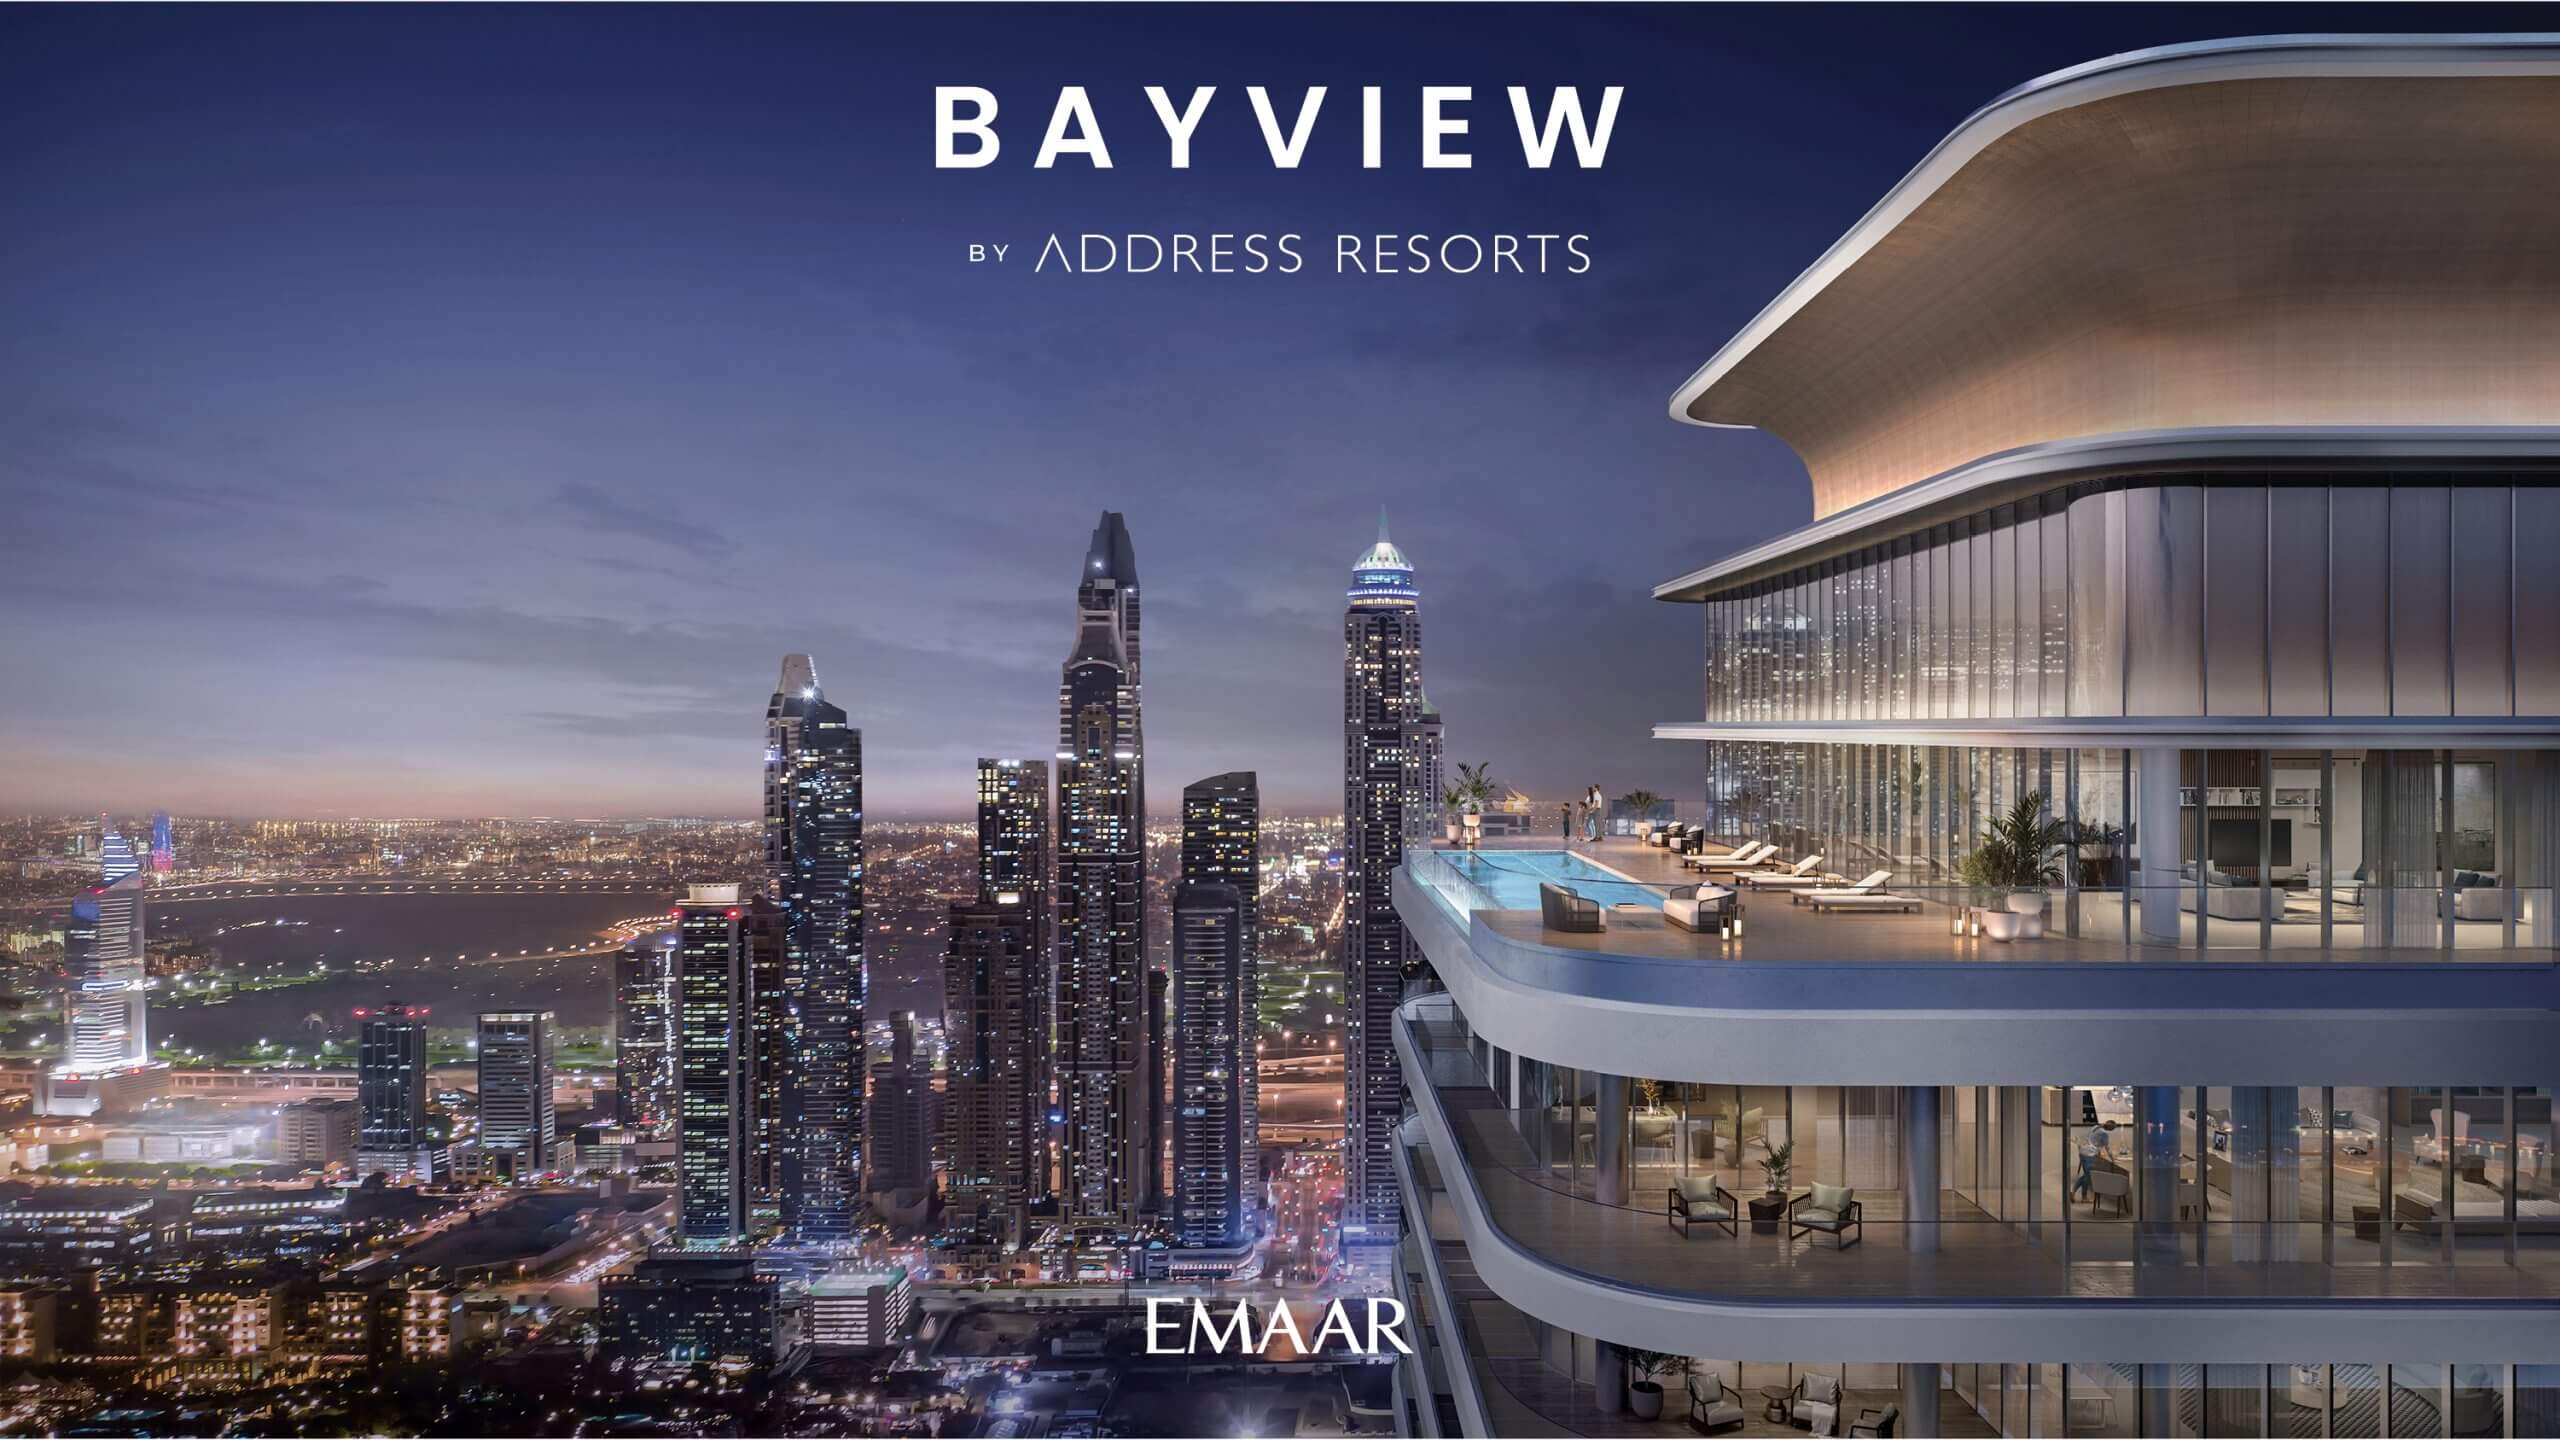 Stunning BAYVIEW_BRANDED_RENDERS properties showcased by Dubai estate agency PJ International – Luxury living at its finest in the heart of Dubai.